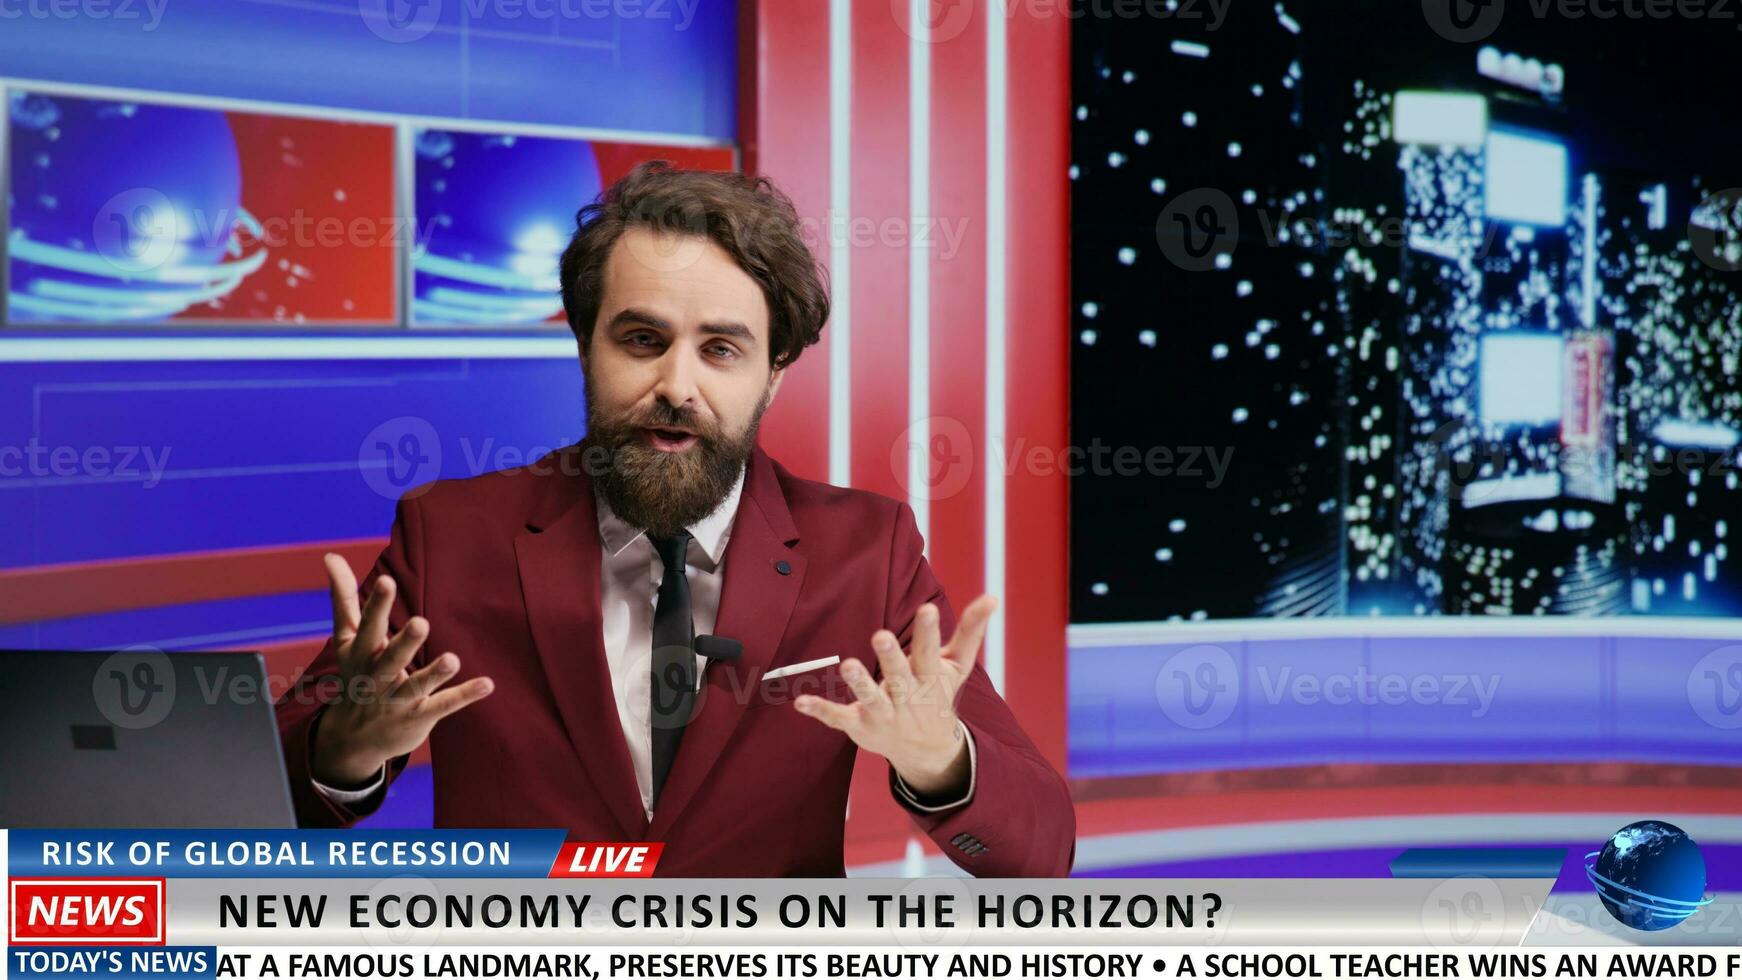 Late night talk show presenter creating content for live television program, discussing about world problems like ecomony crisis for broadcasting network. News journalist reading headlines. photo